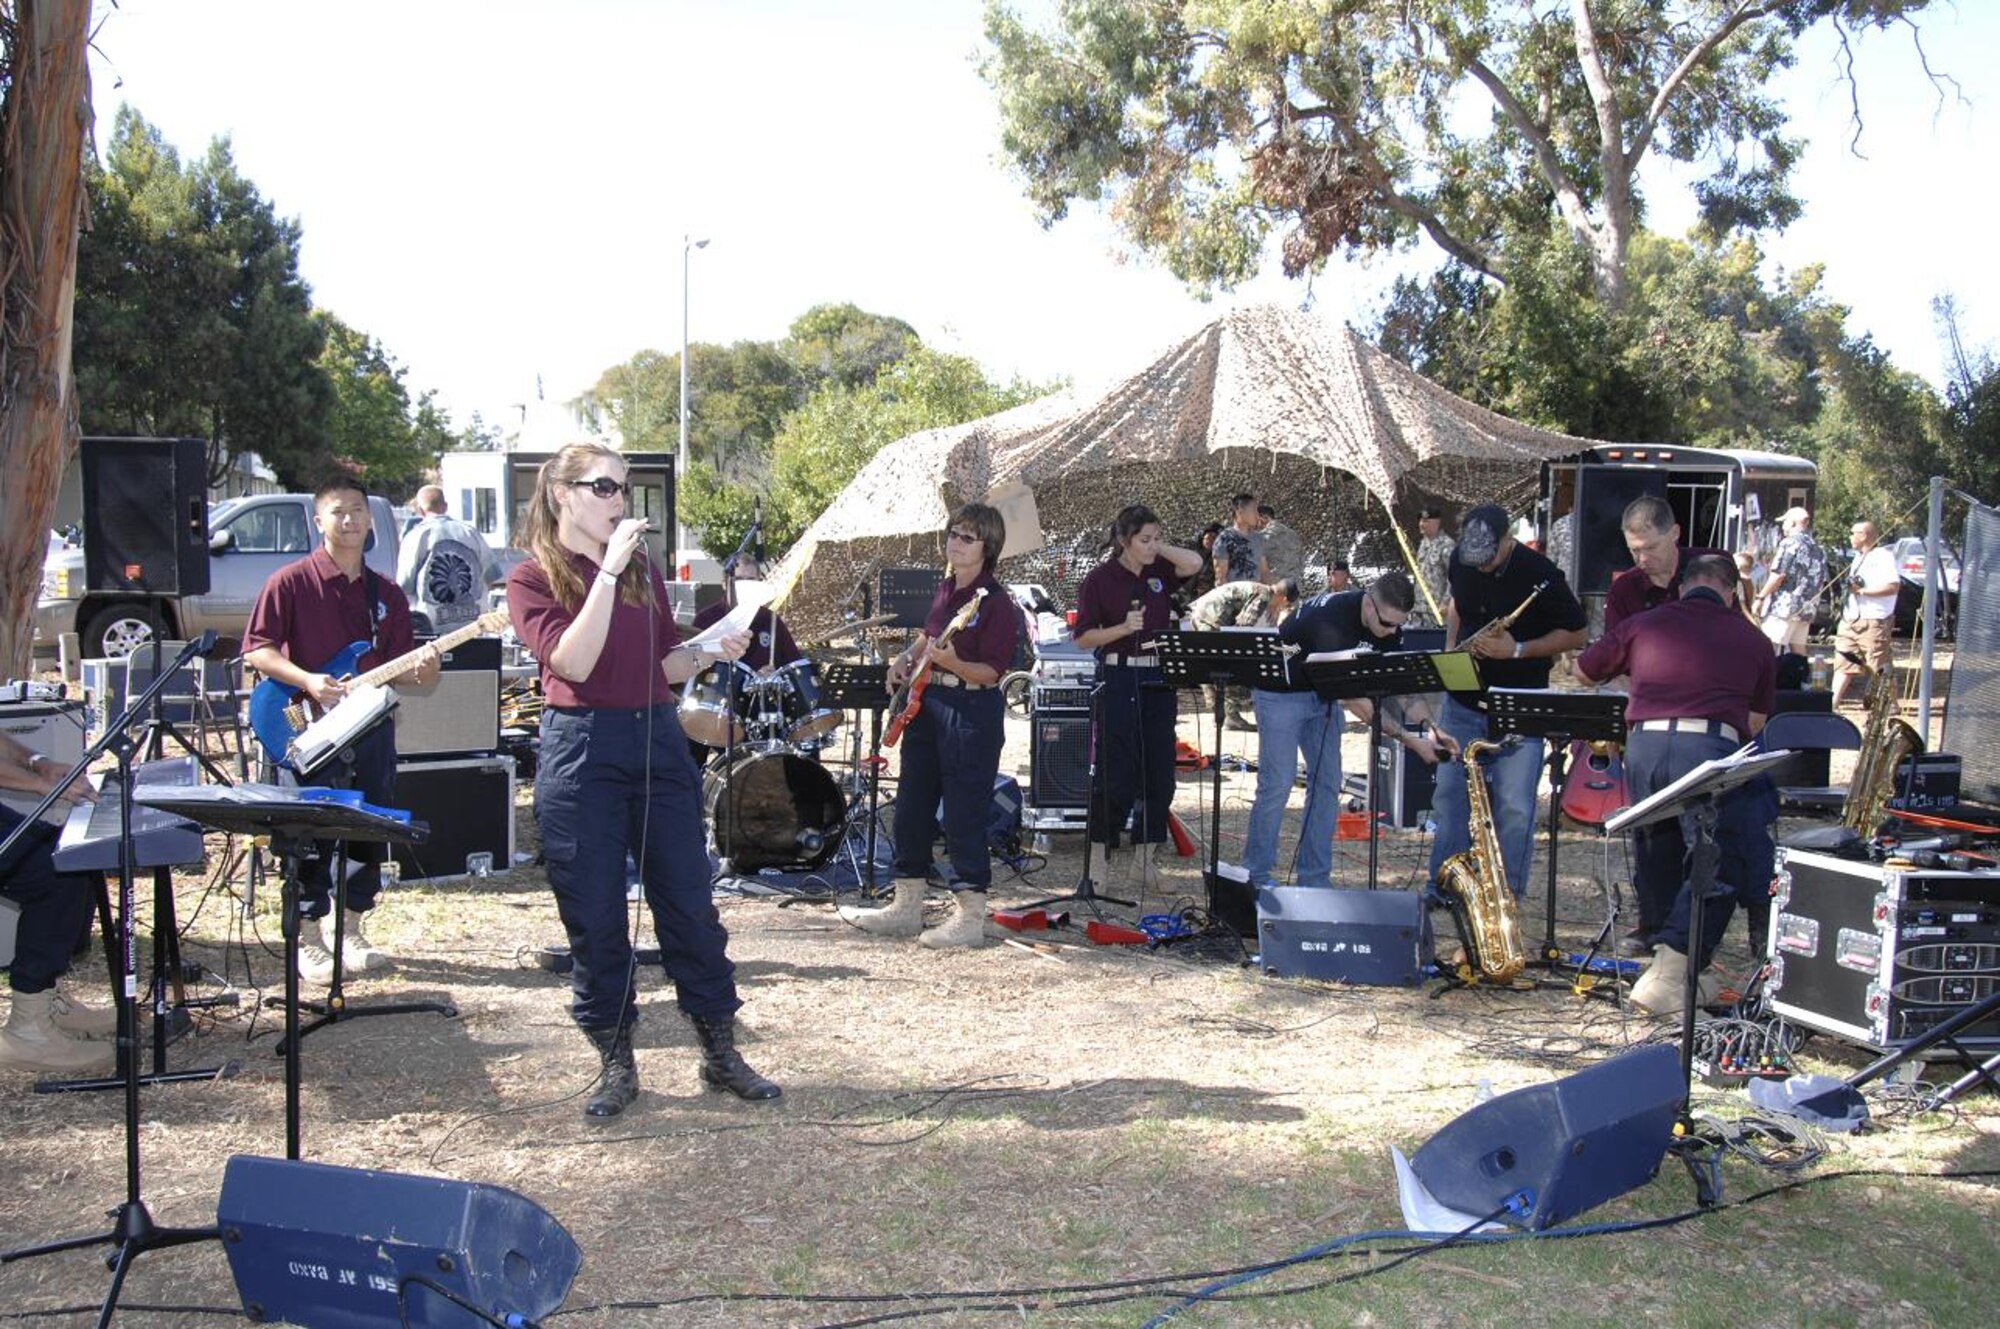 Members of the 561st Band of the West Coast from the 129th Rescue Wing perform for family and friends at the annual Family Day Picnic hosted Oct. 4 at Moffett Federal Airfield, Calif. (Air National Guard photo by Master Sgt. Dan Kacir)